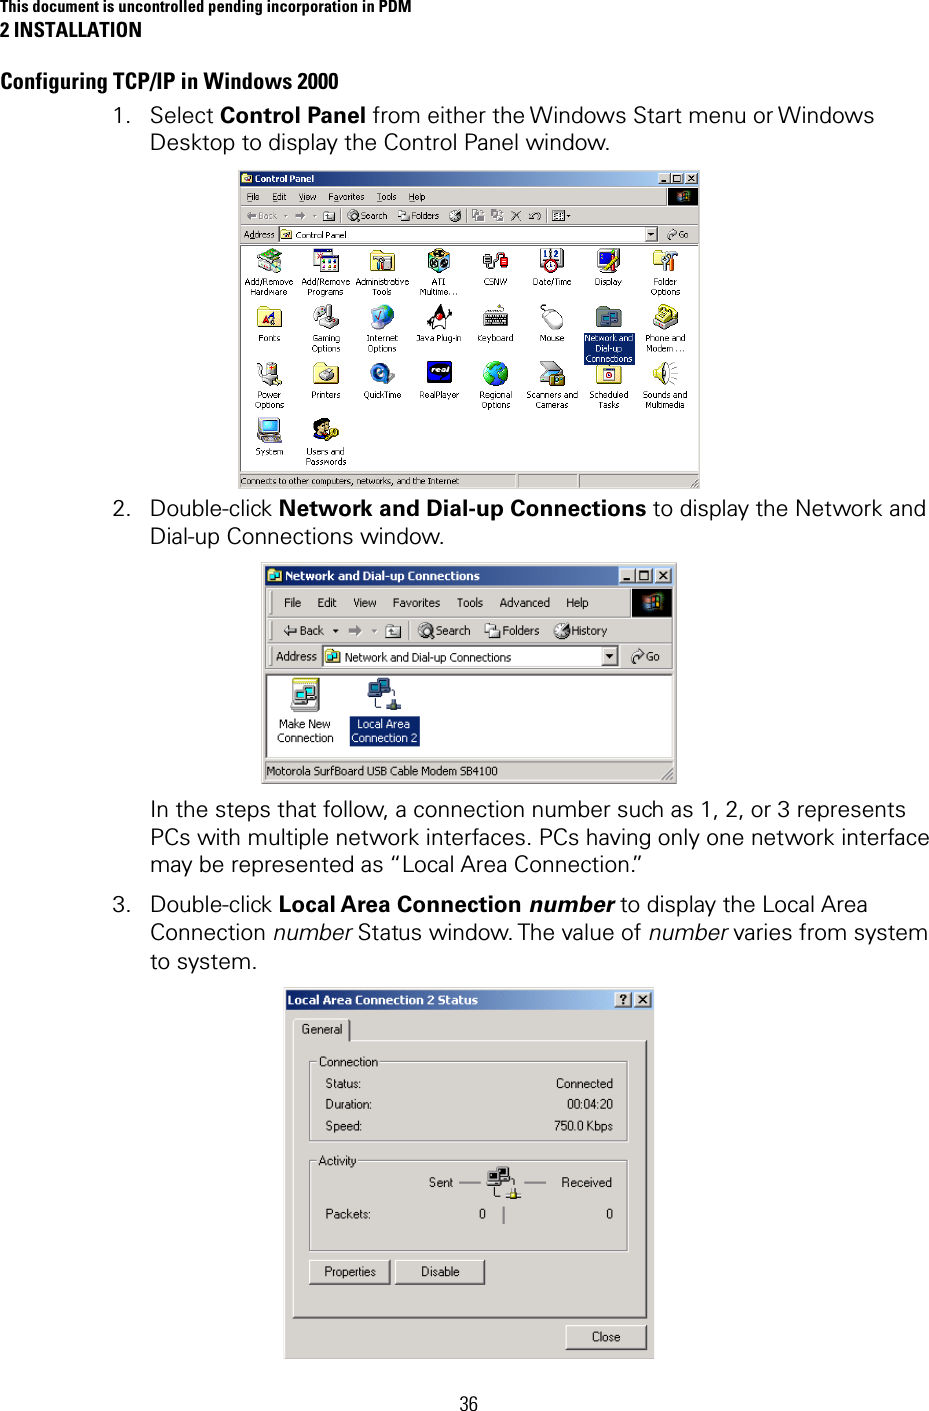 This document is uncontrolled pending incorporation in PDM 2 INSTALLATION 36 Configuring TCP/IP in Windows 2000 1. Select Control Panel from either the Windows Start menu or Windows Desktop to display the Control Panel window.  2. Double-click Network and Dial-up Connections to display the Network and Dial-up Connections window.  In the steps that follow, a connection number such as 1, 2, or 3 represents PCs with multiple network interfaces. PCs having only one network interface may be represented as “Local Area Connection.” 3. Double-click Local Area Connection number to display the Local Area Connection number Status window. The value of number varies from system to system.  